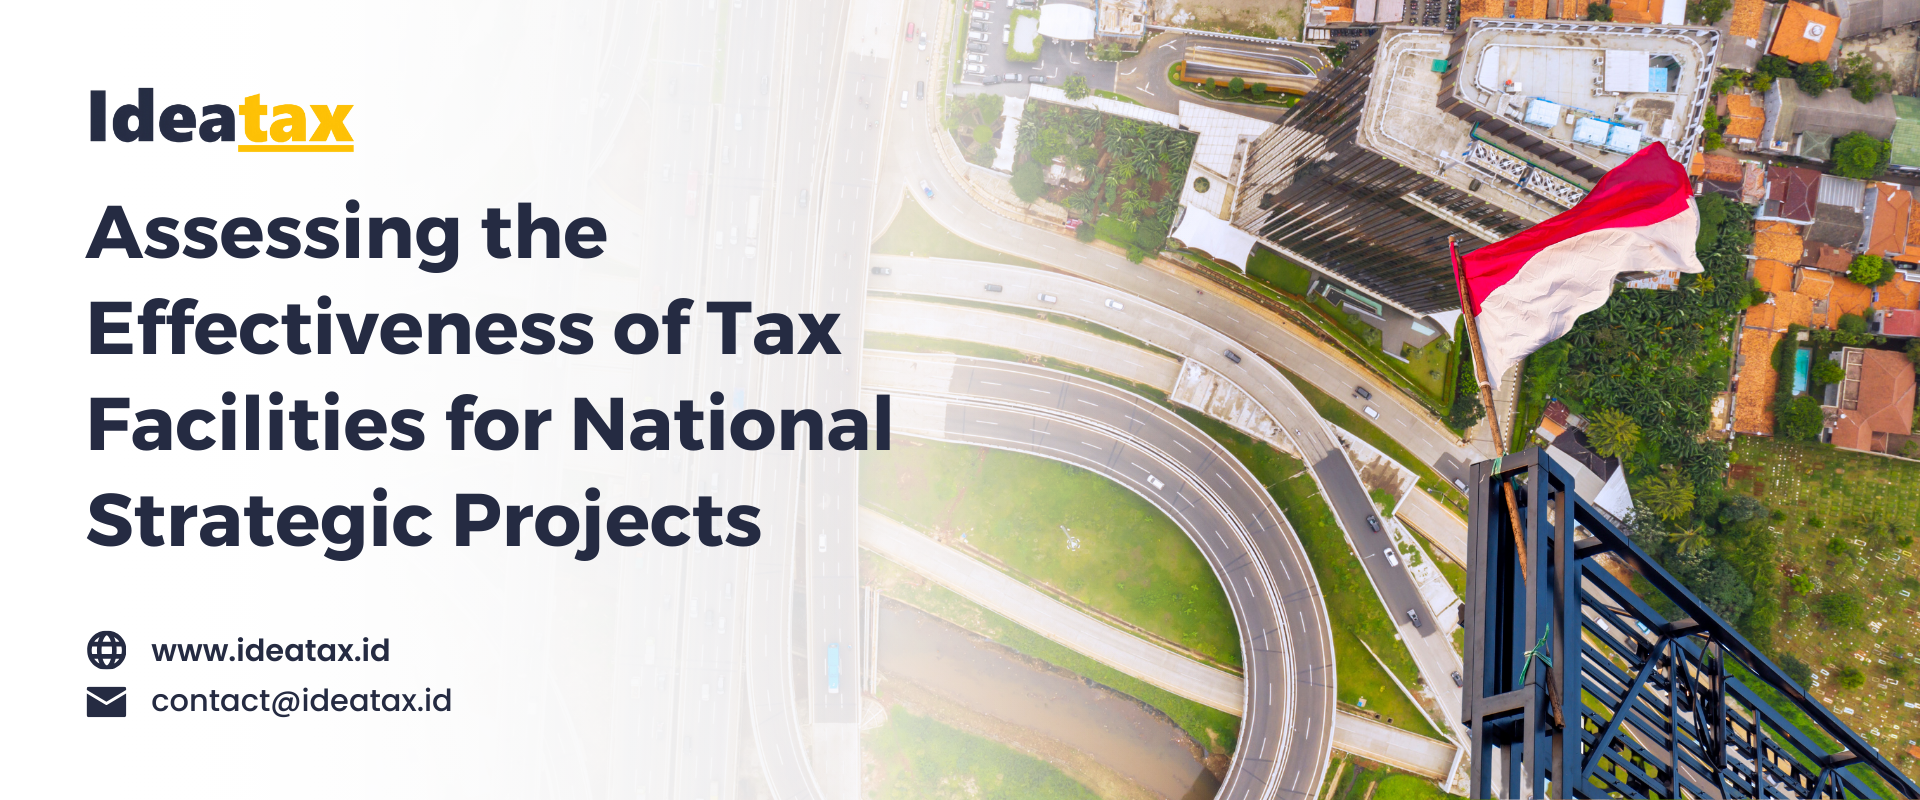 Assessing the Effectiveness of Tax Facilities for National Strategic Projects